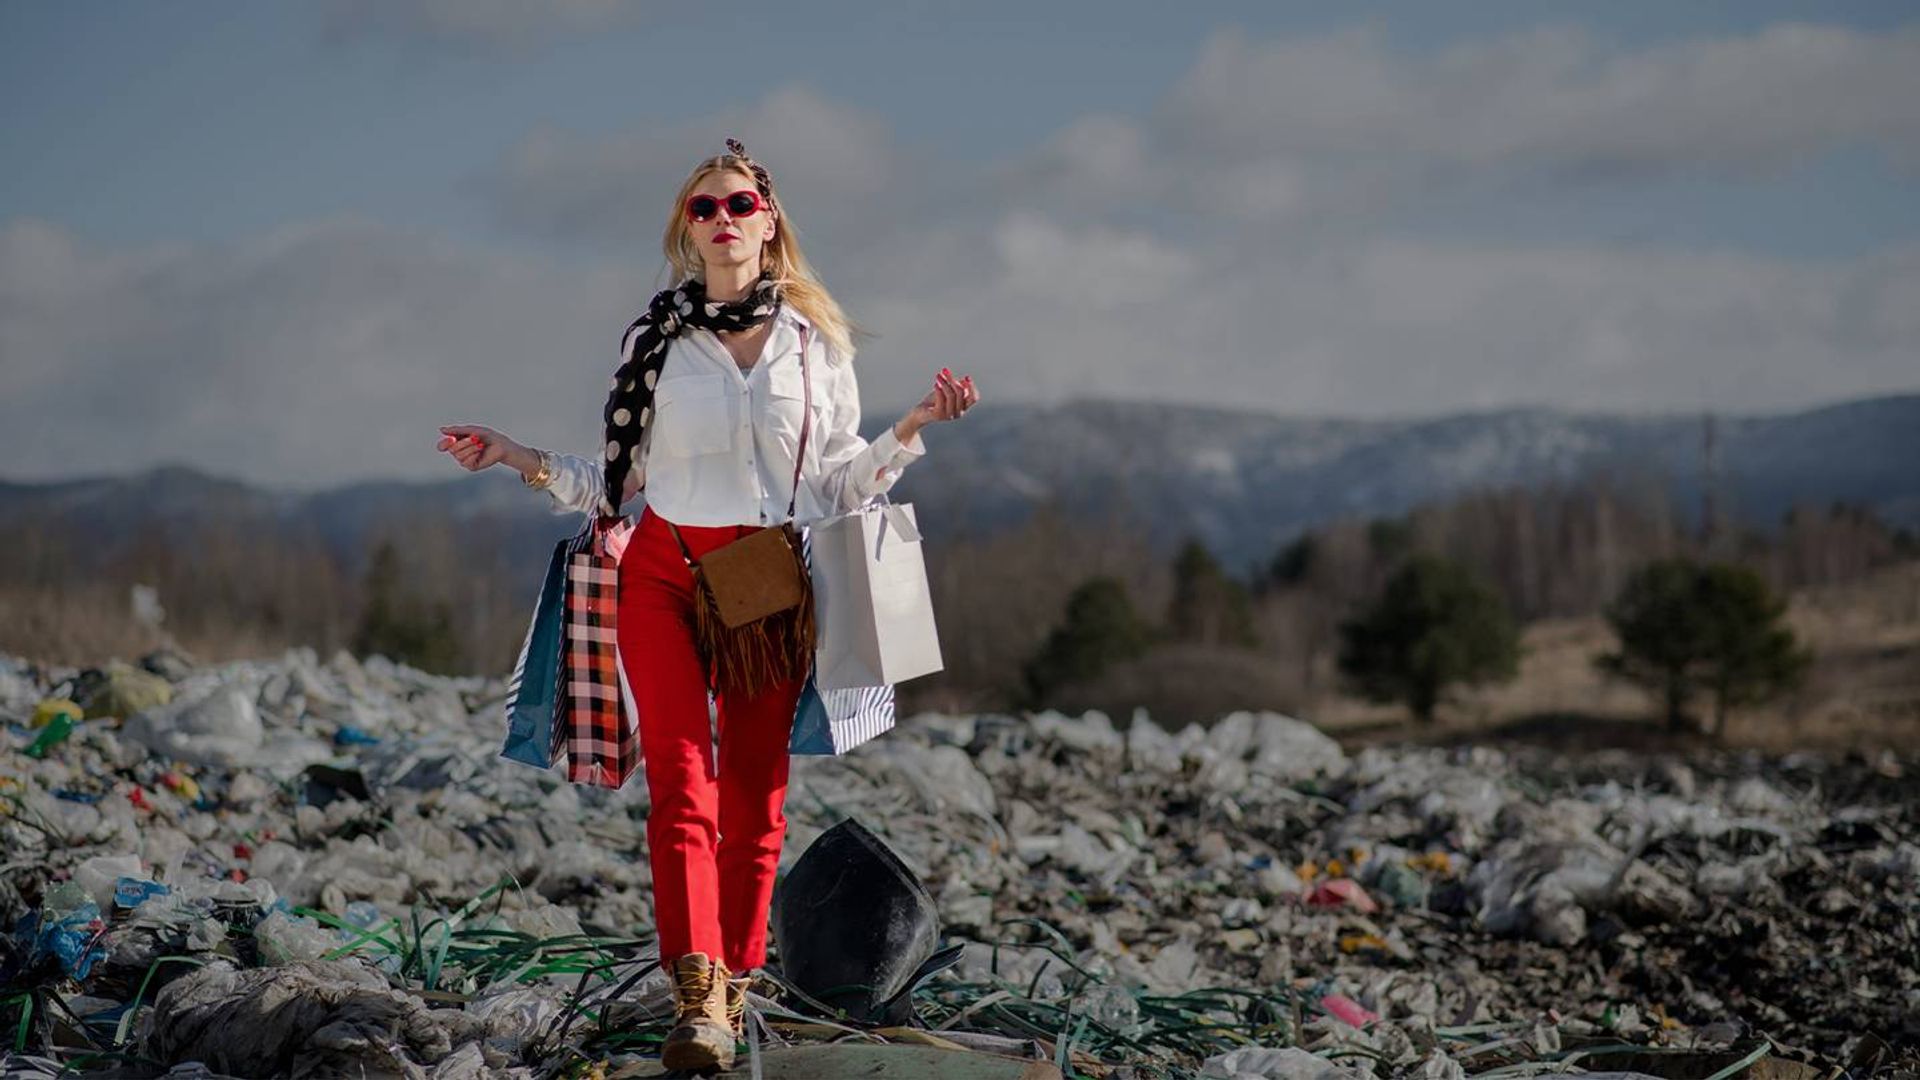 Model walking through piles of discarded clothes